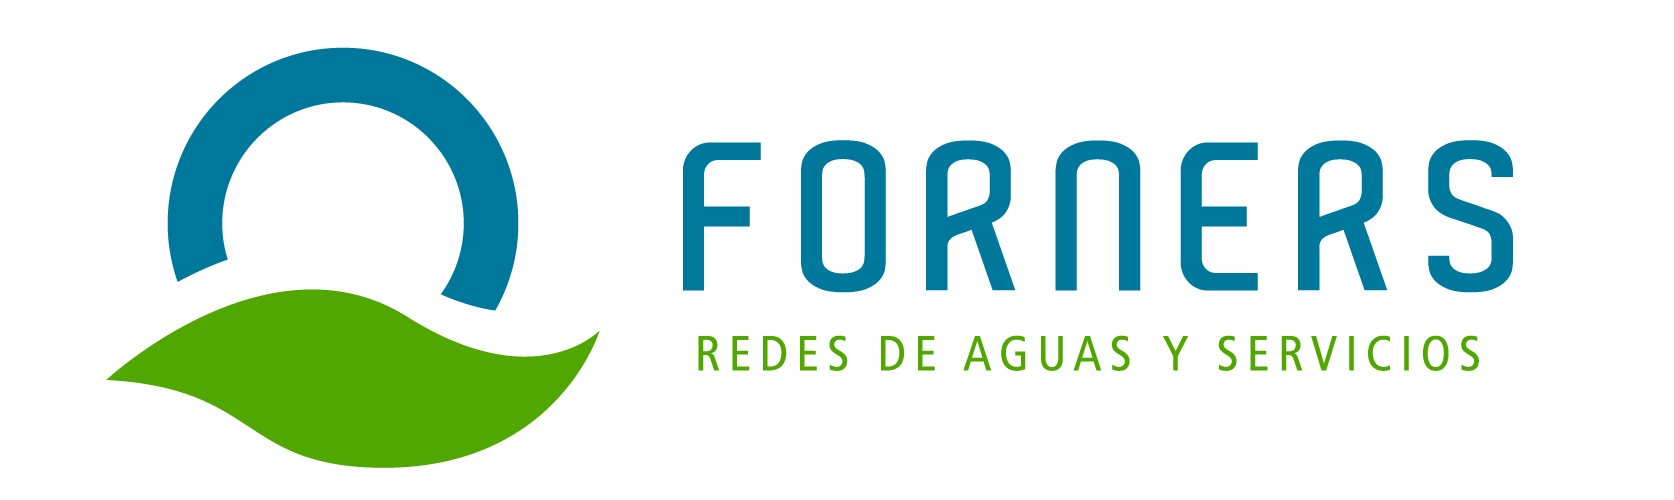 logo-forners